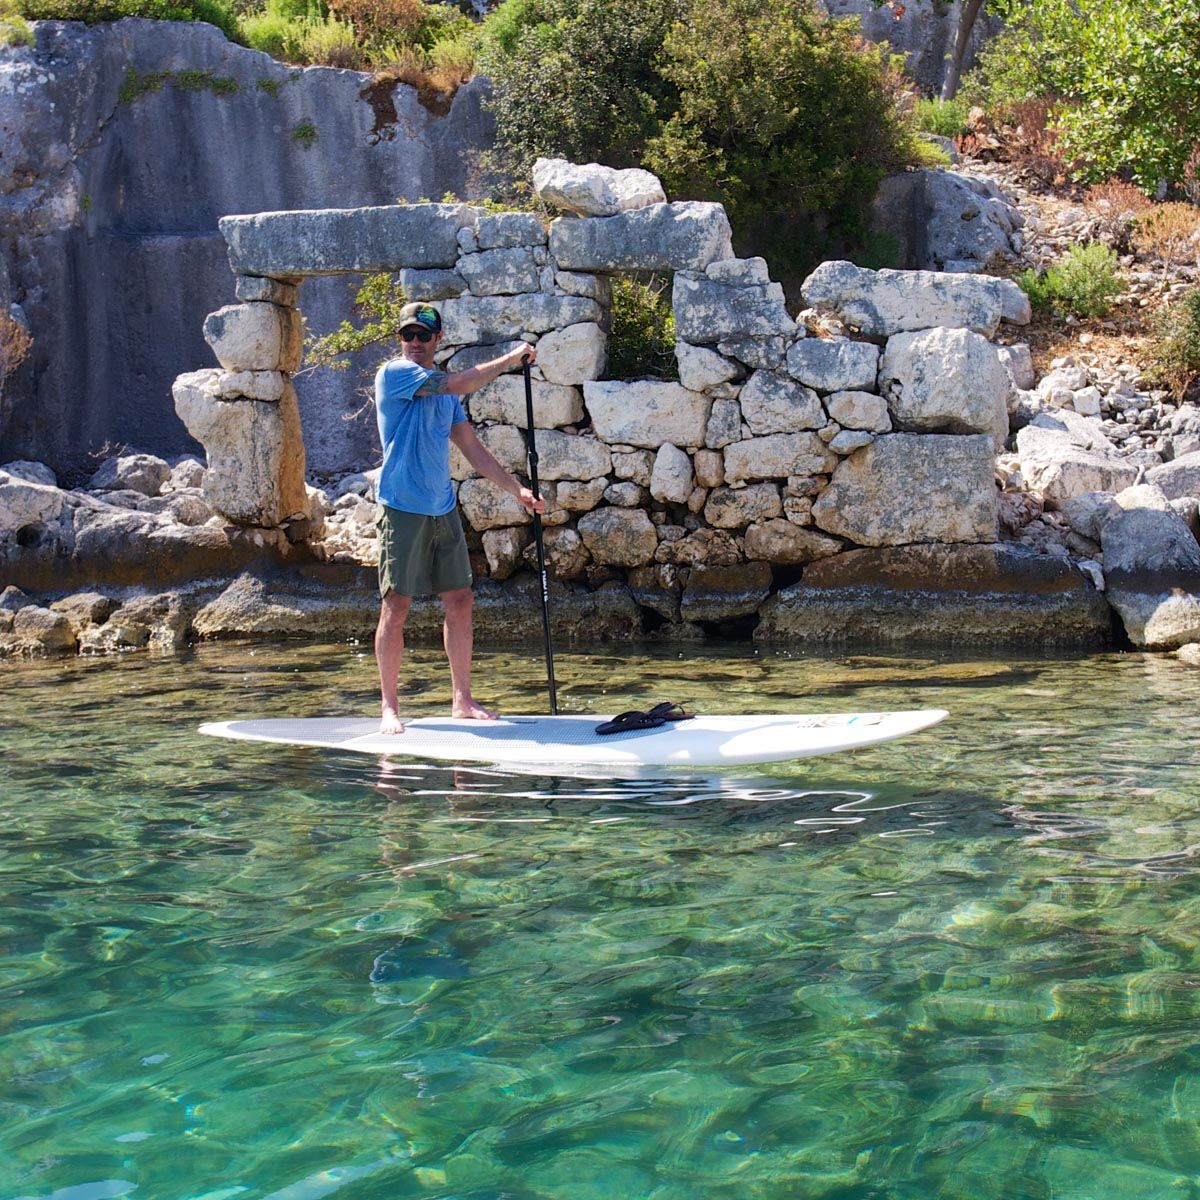 Paddleboarder passing by the ruins